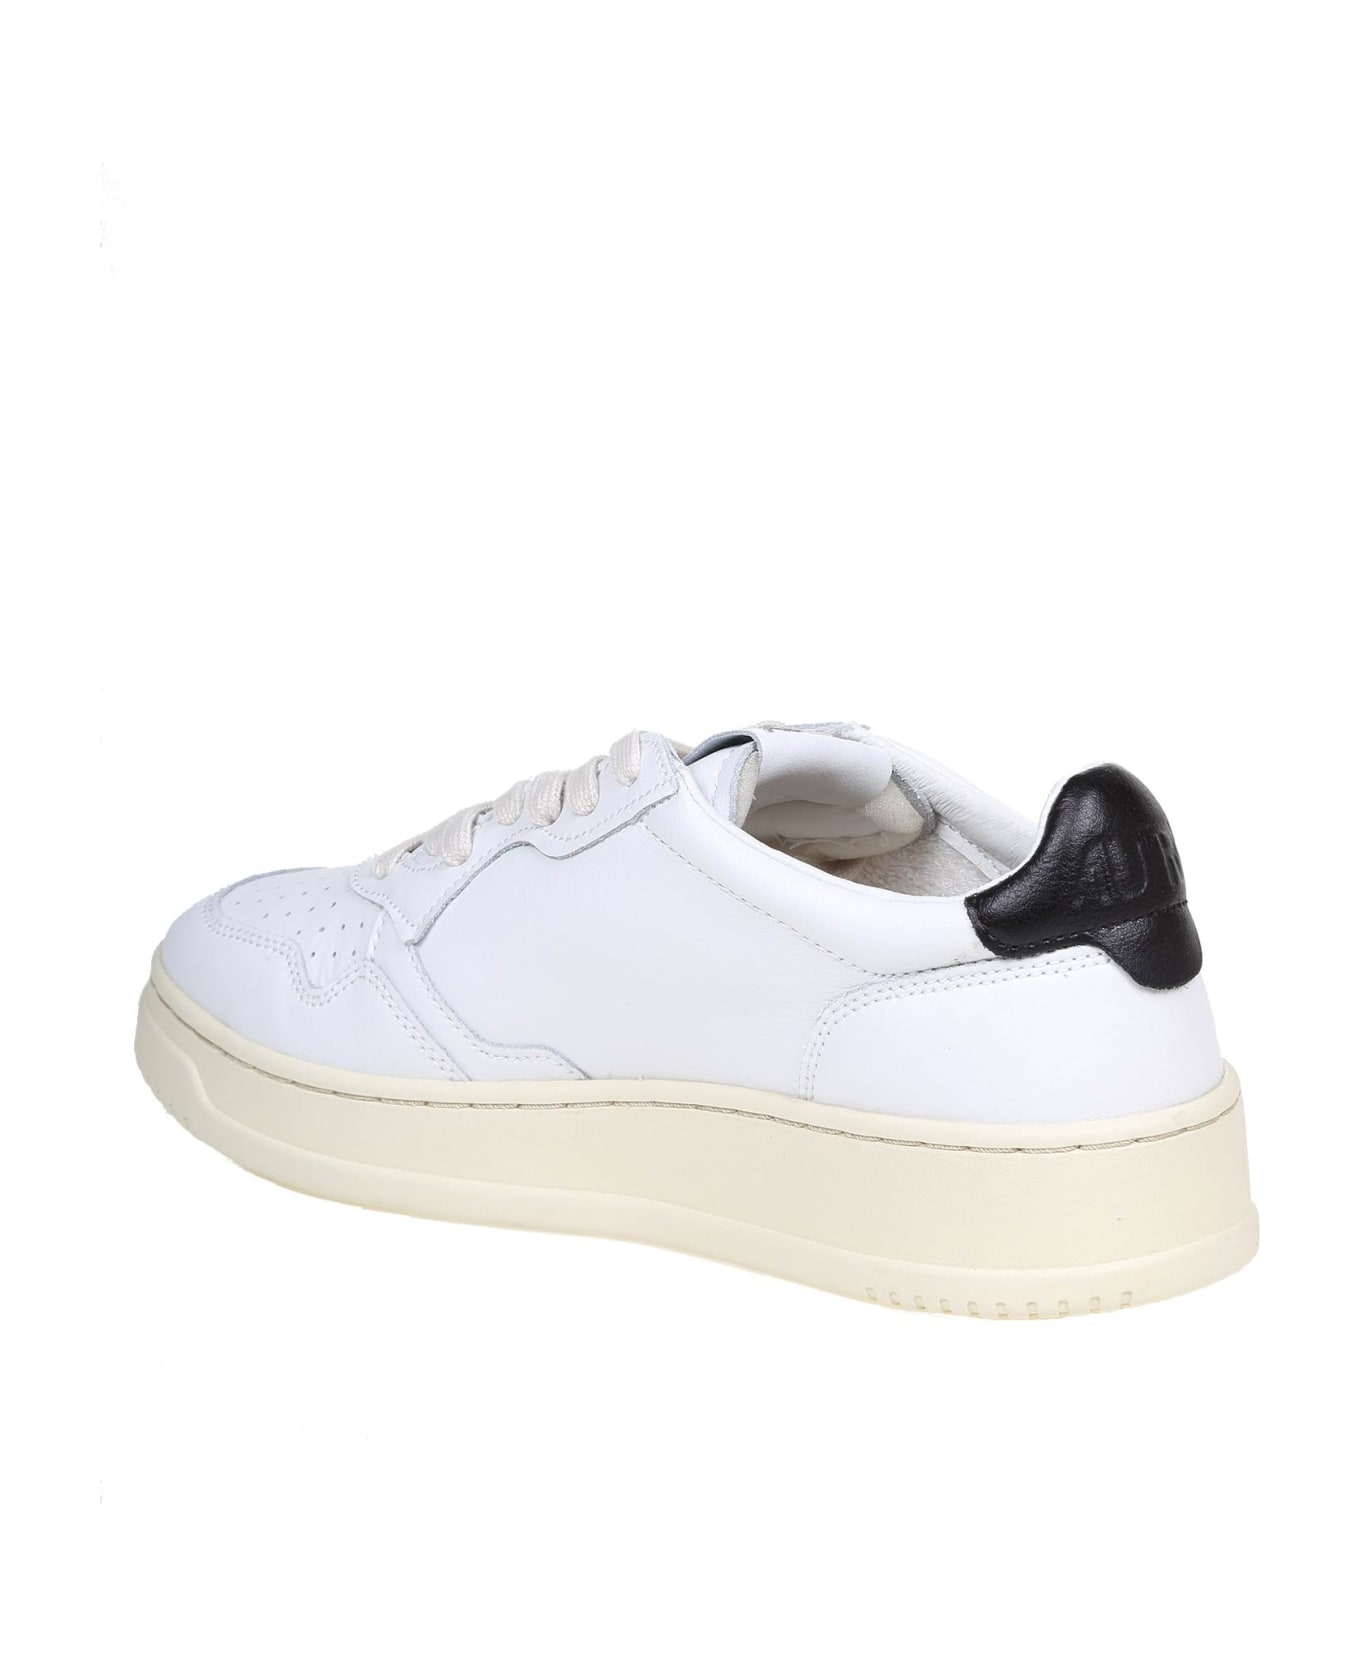 Autry Black And White Leather Sneakers - White/Black スニーカー